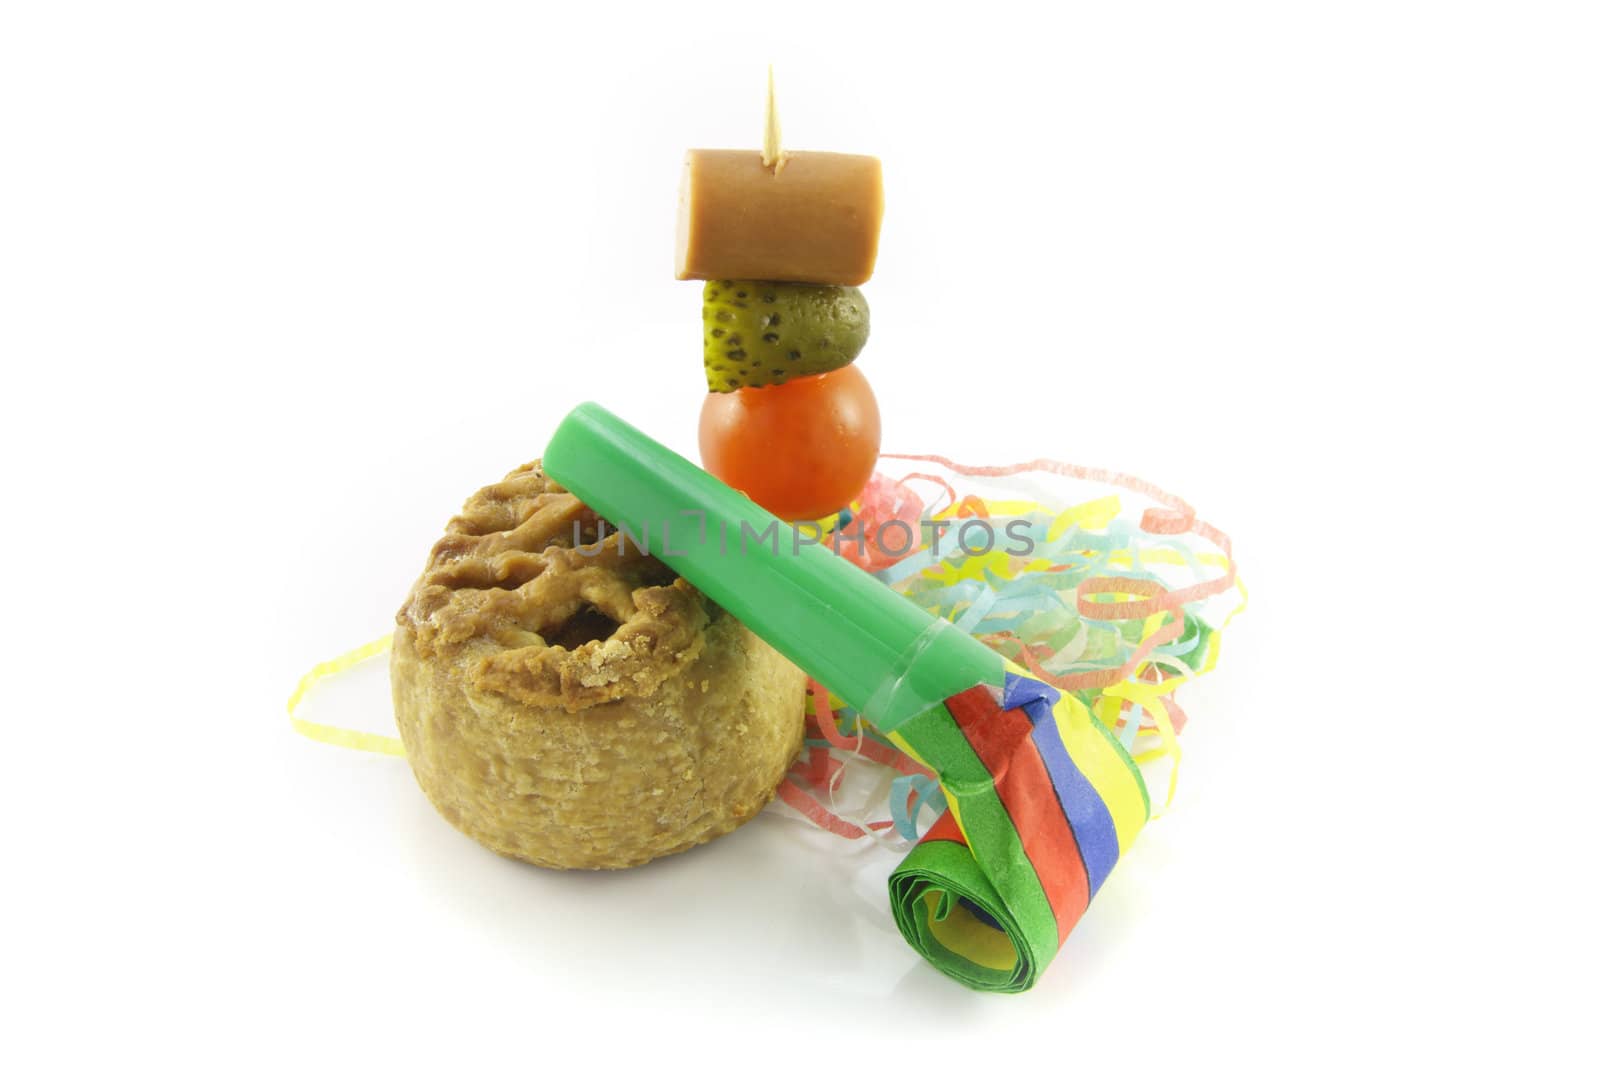 Small pork pie with party blower and cocktail stick containing hot dog sauage, gherkin and tomato with streamers on a reflective white background